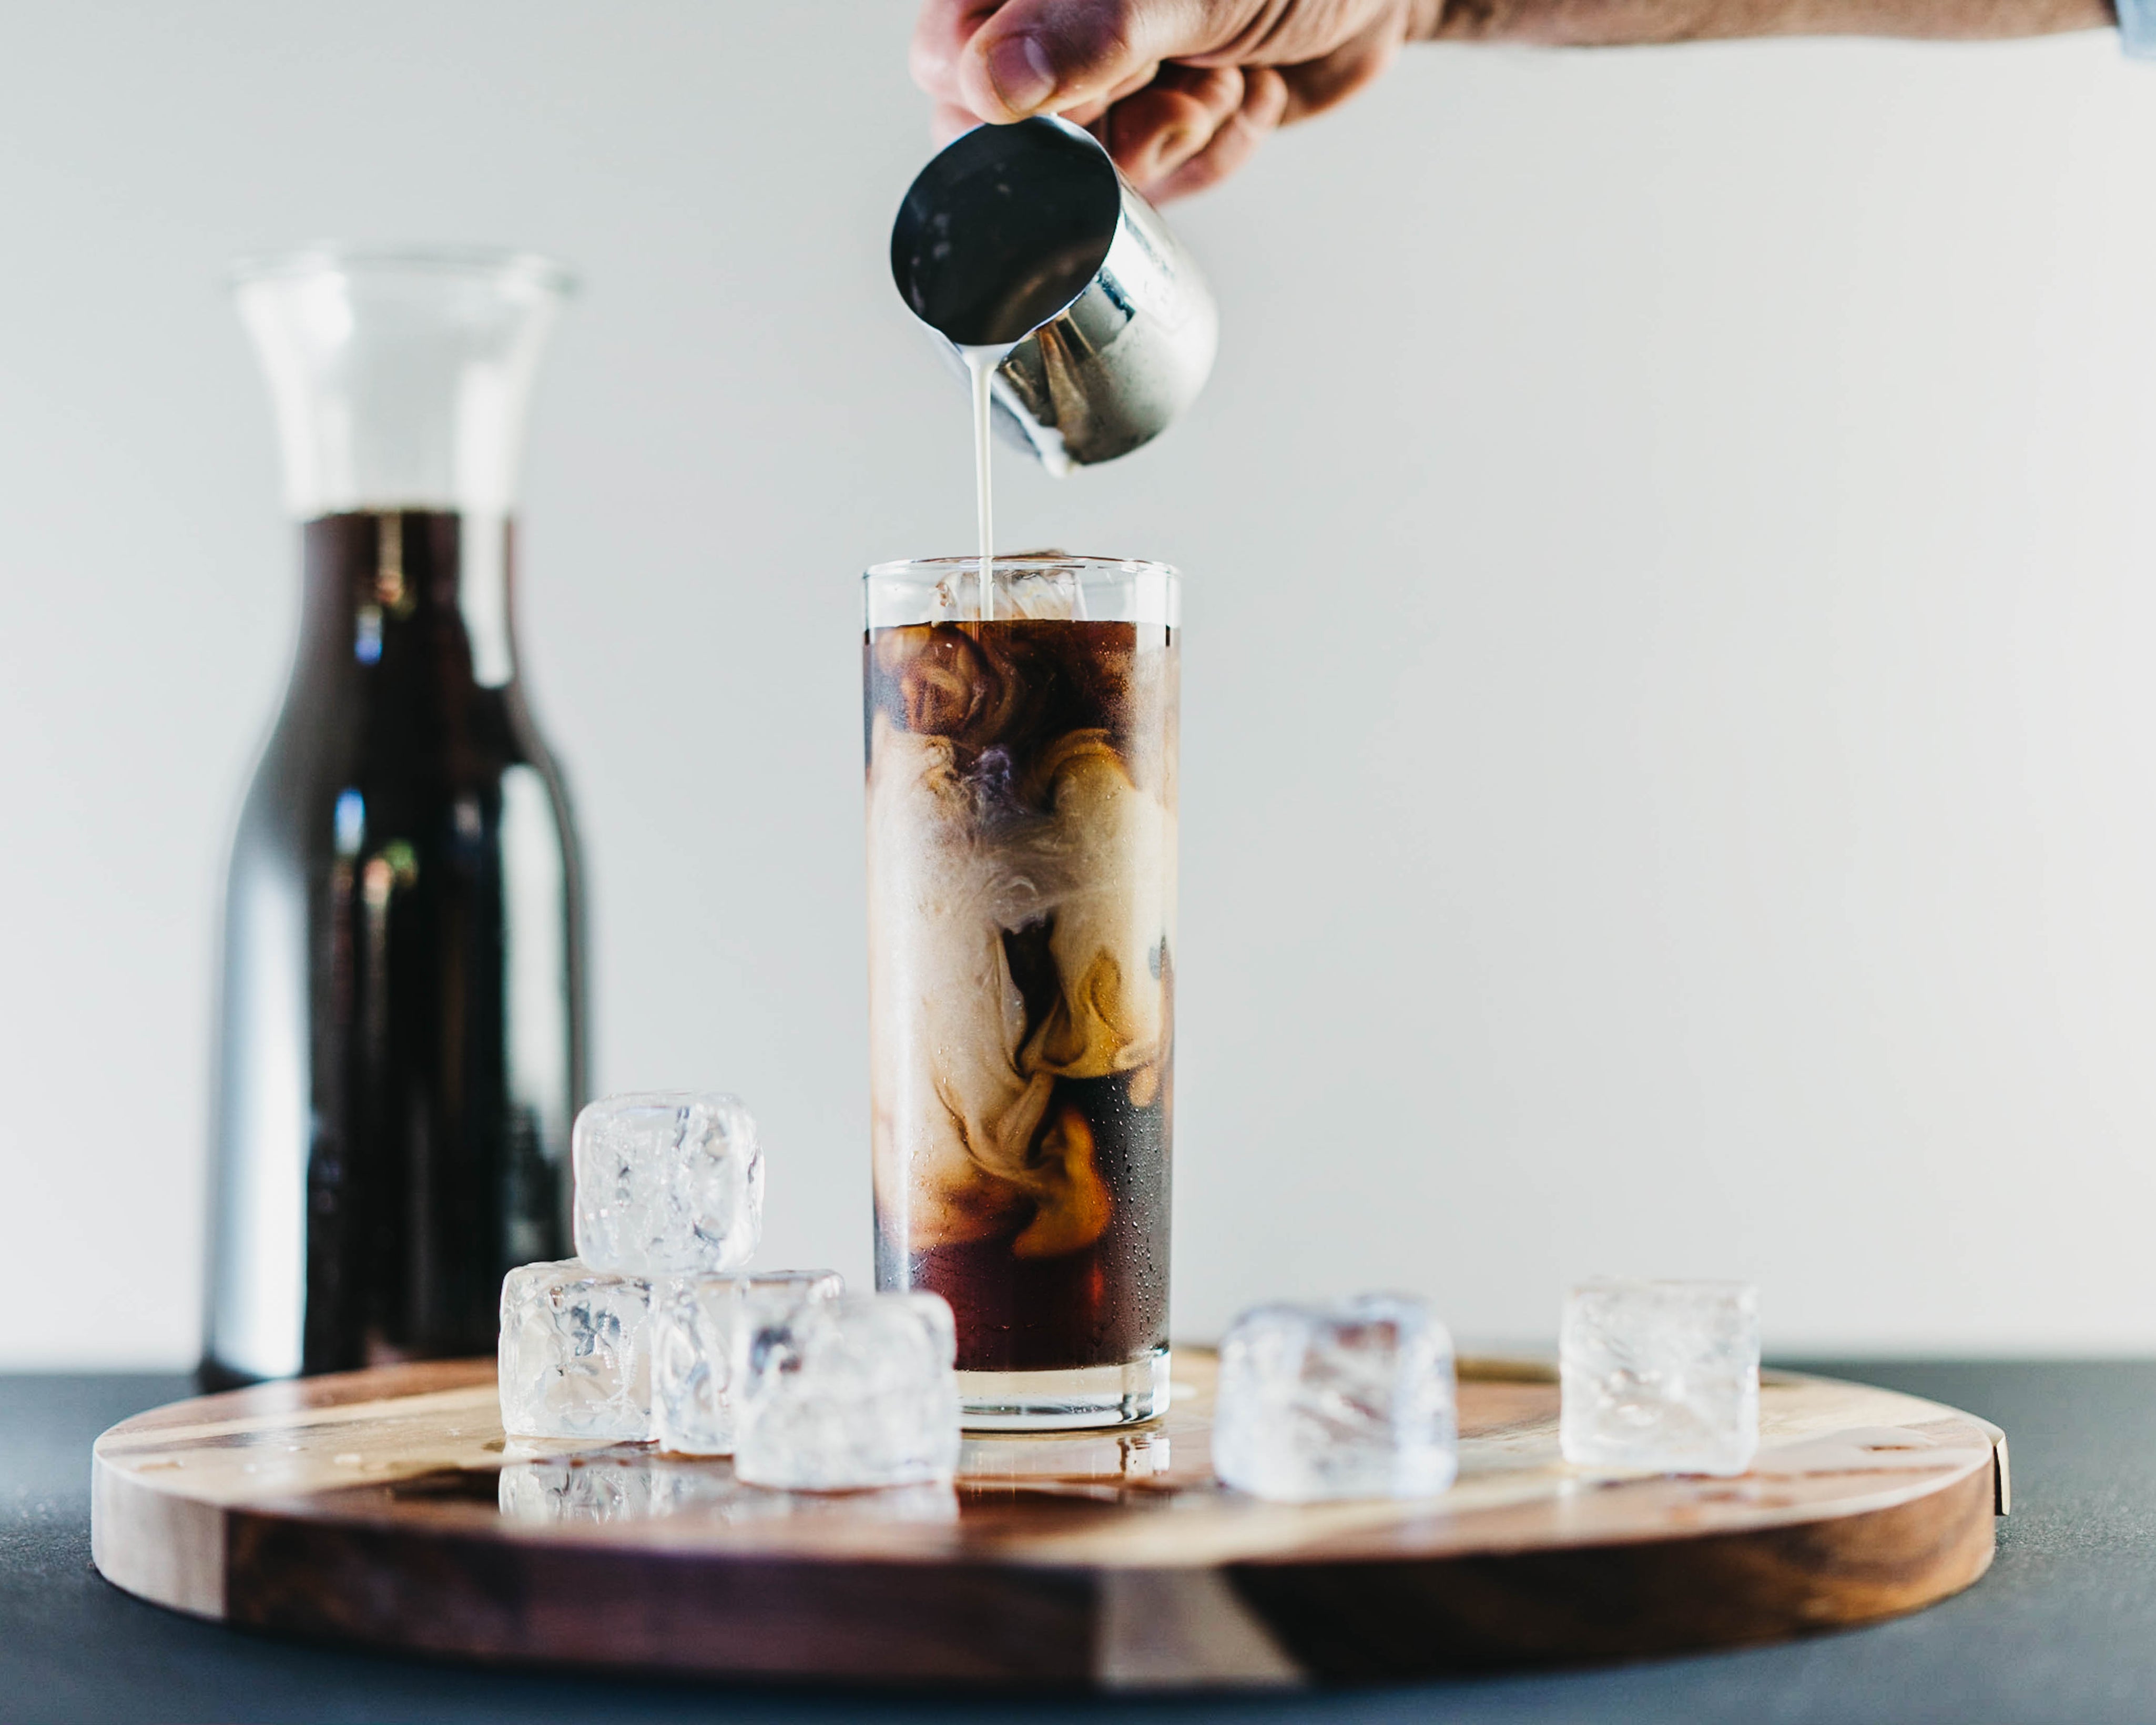 COLD BREWED COFFEE